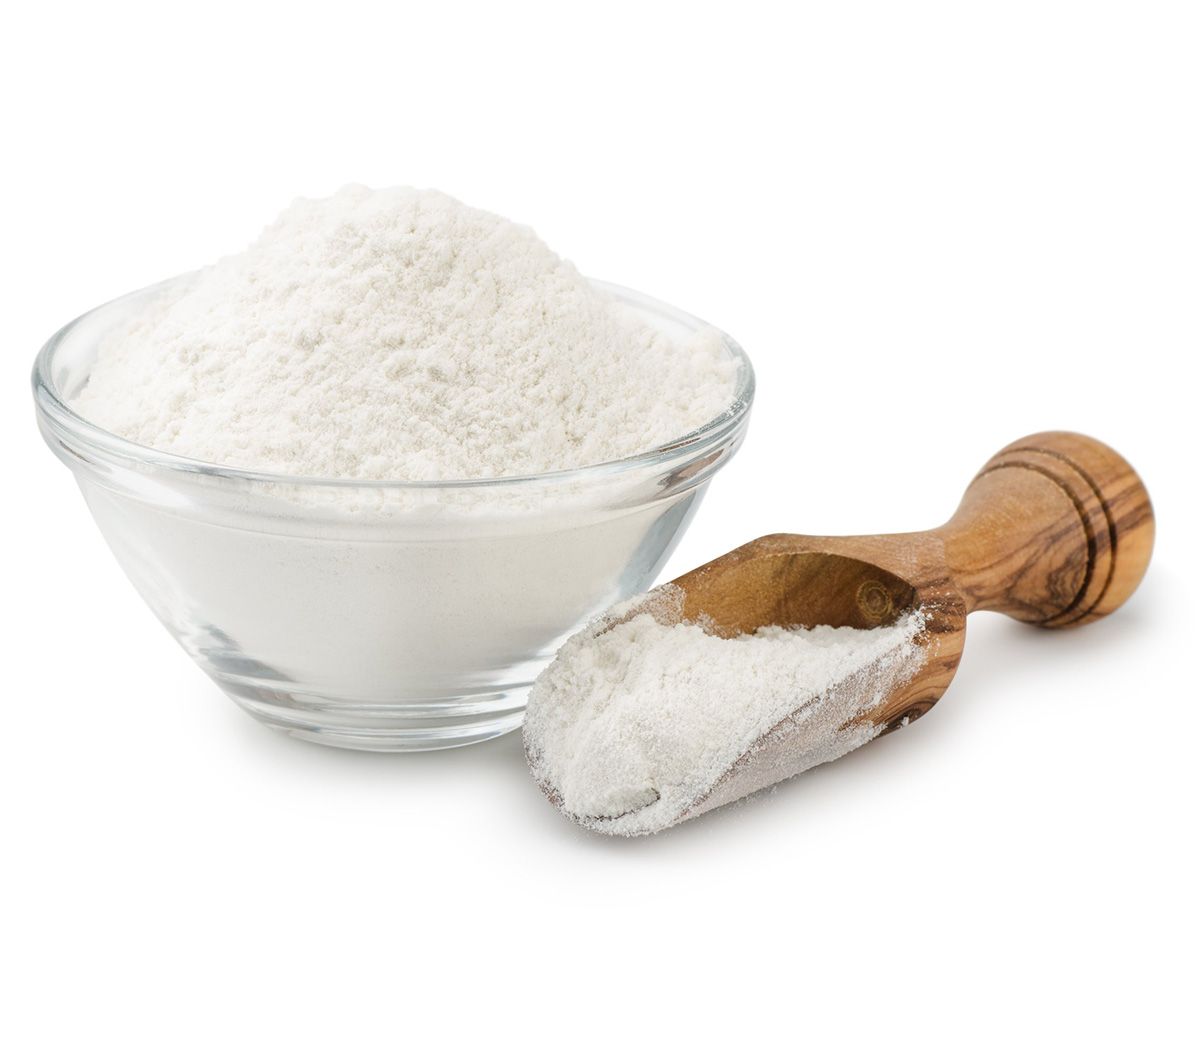 How to use Diatomaceous Earth